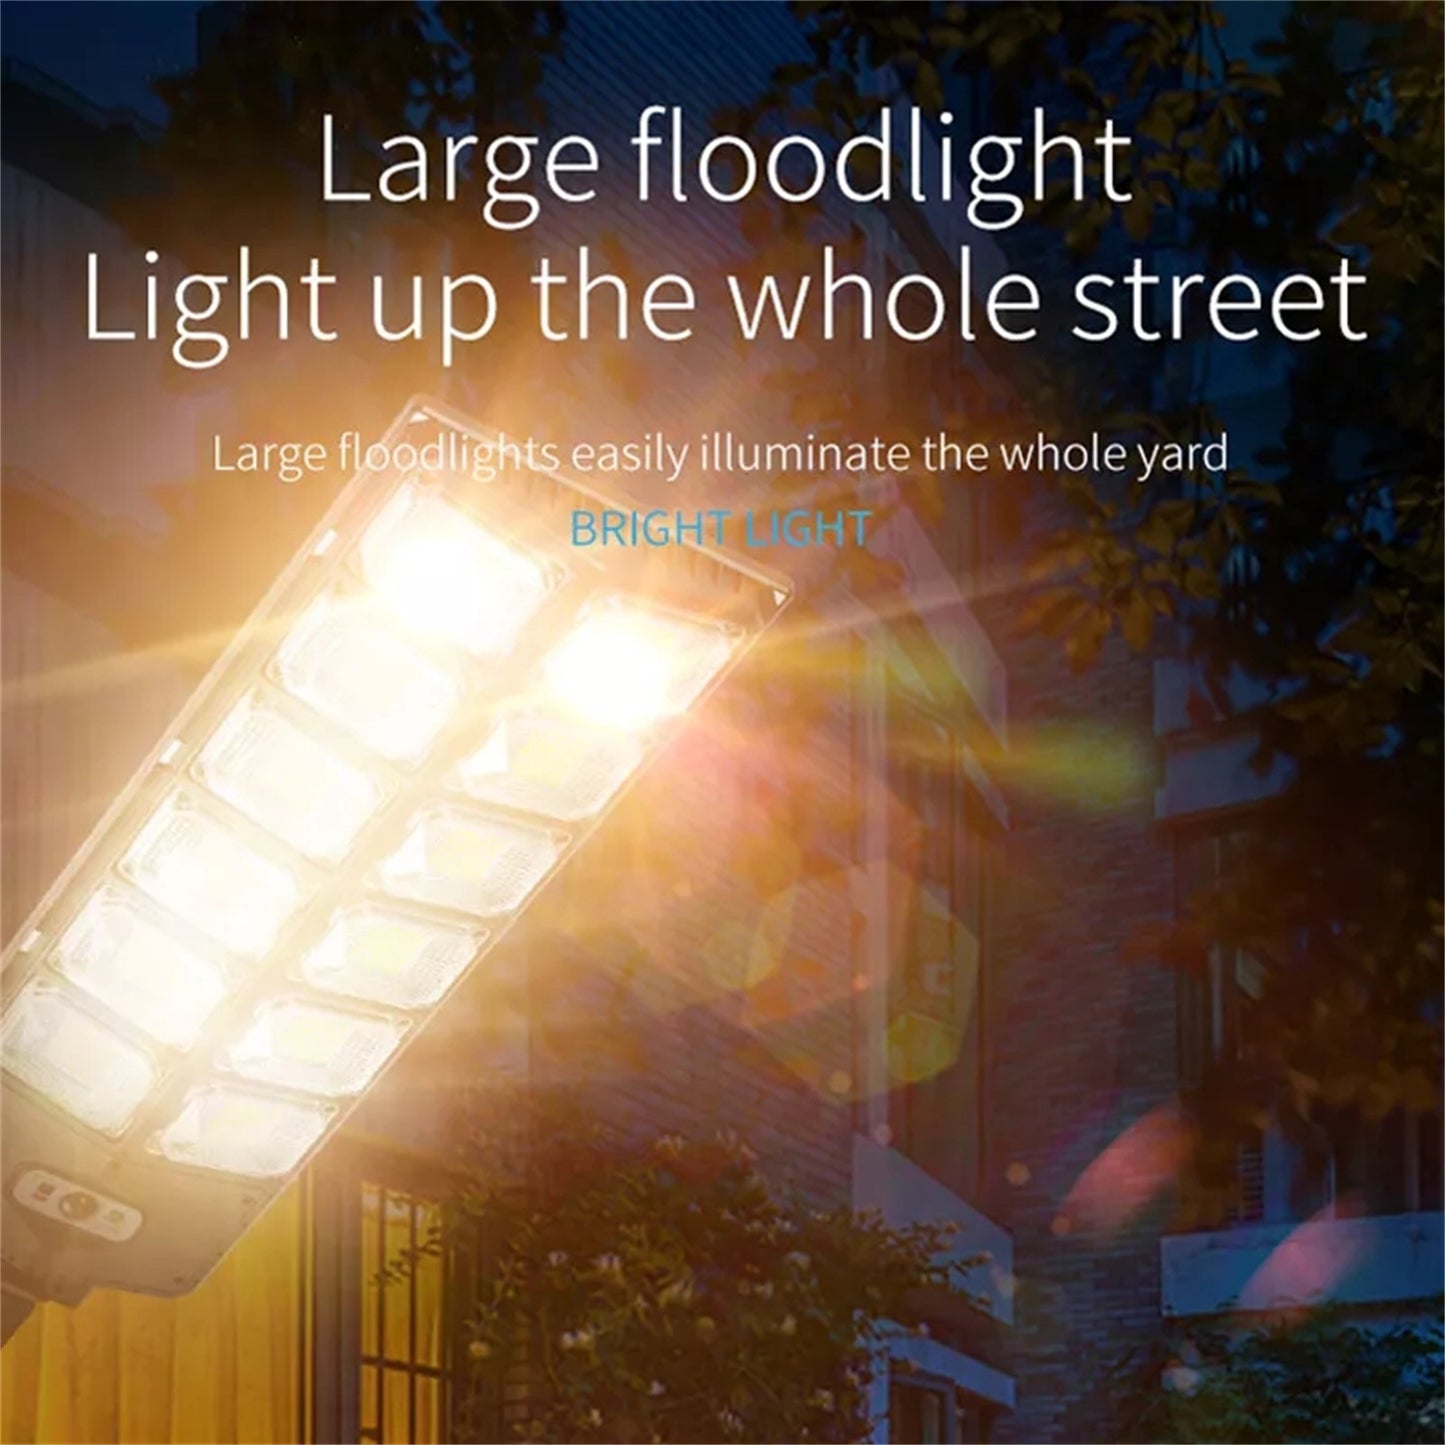 Super Bright Solar Street Lights, 5500LM 6500K Ultra Bright Dusk to Dawn Solar Motion Sensor Lights with Remote Control, Solar Security Wall Light Road Lamp for Garden Yard Patio Parking Lot